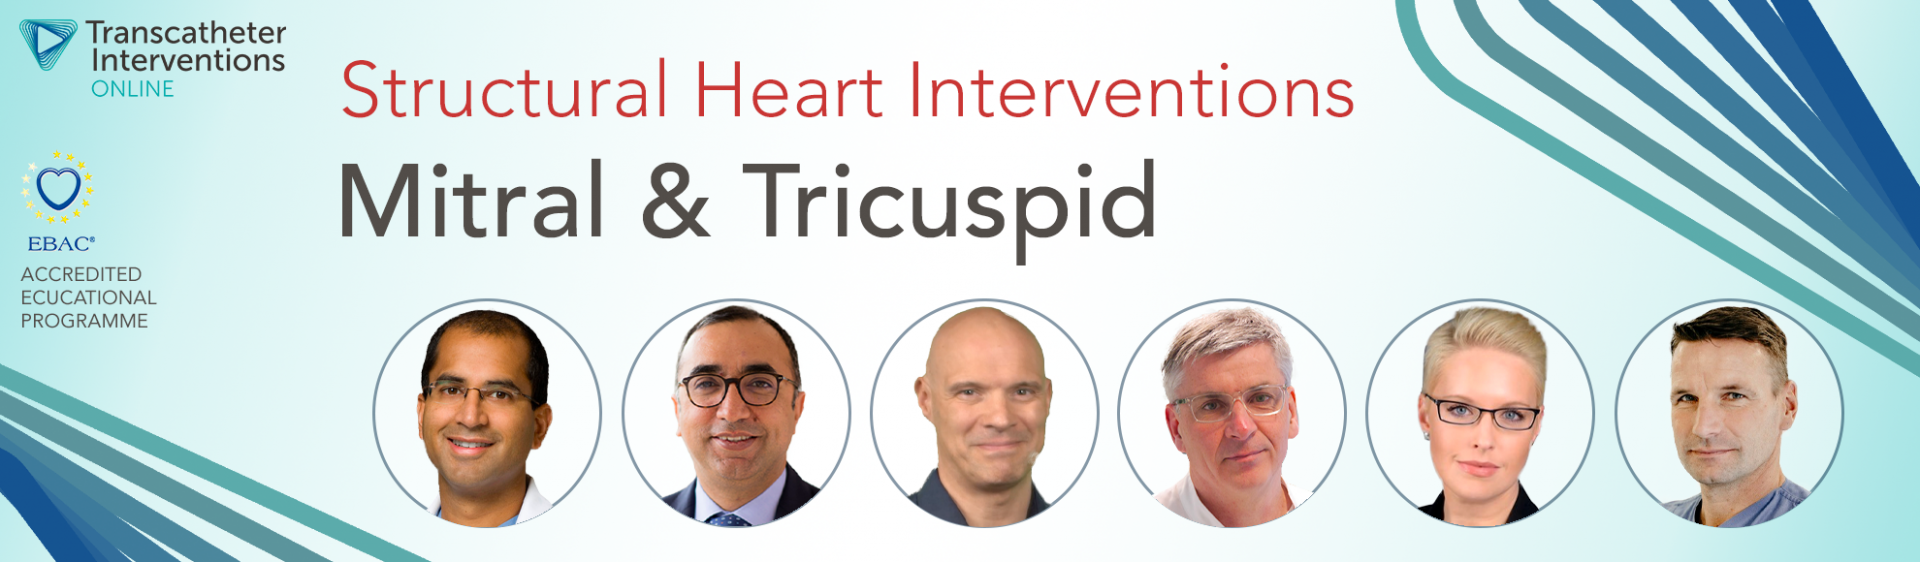 TIO 2020 – Mitral and Tricuspid Presentations